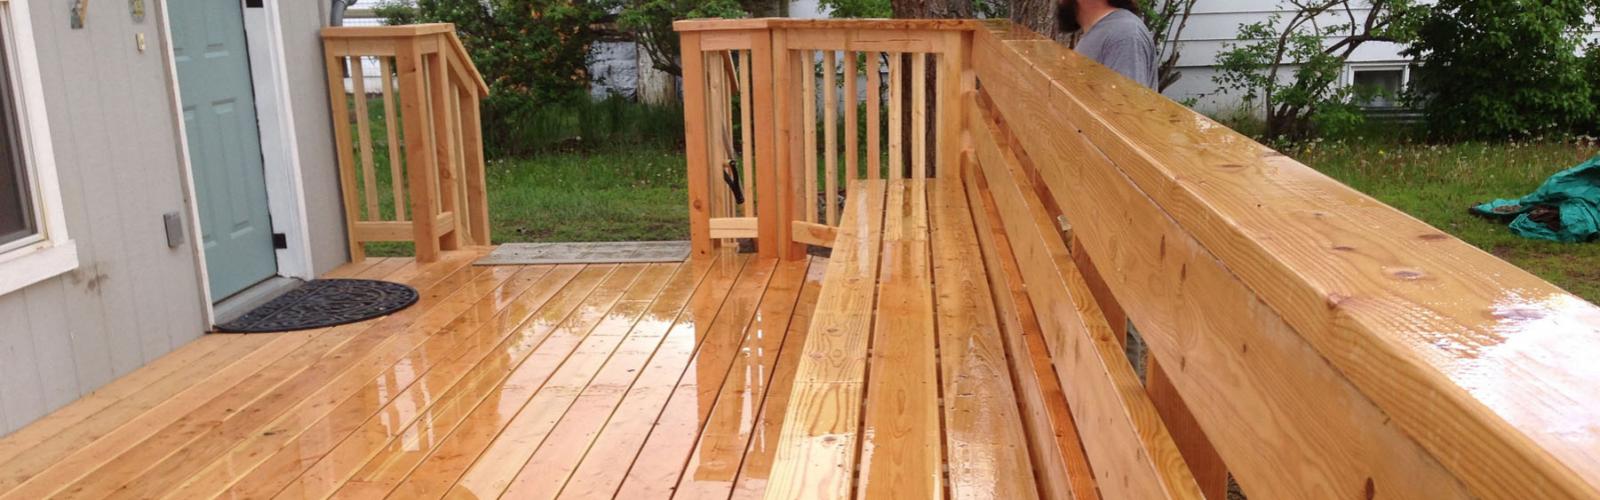 New deck with built in benches